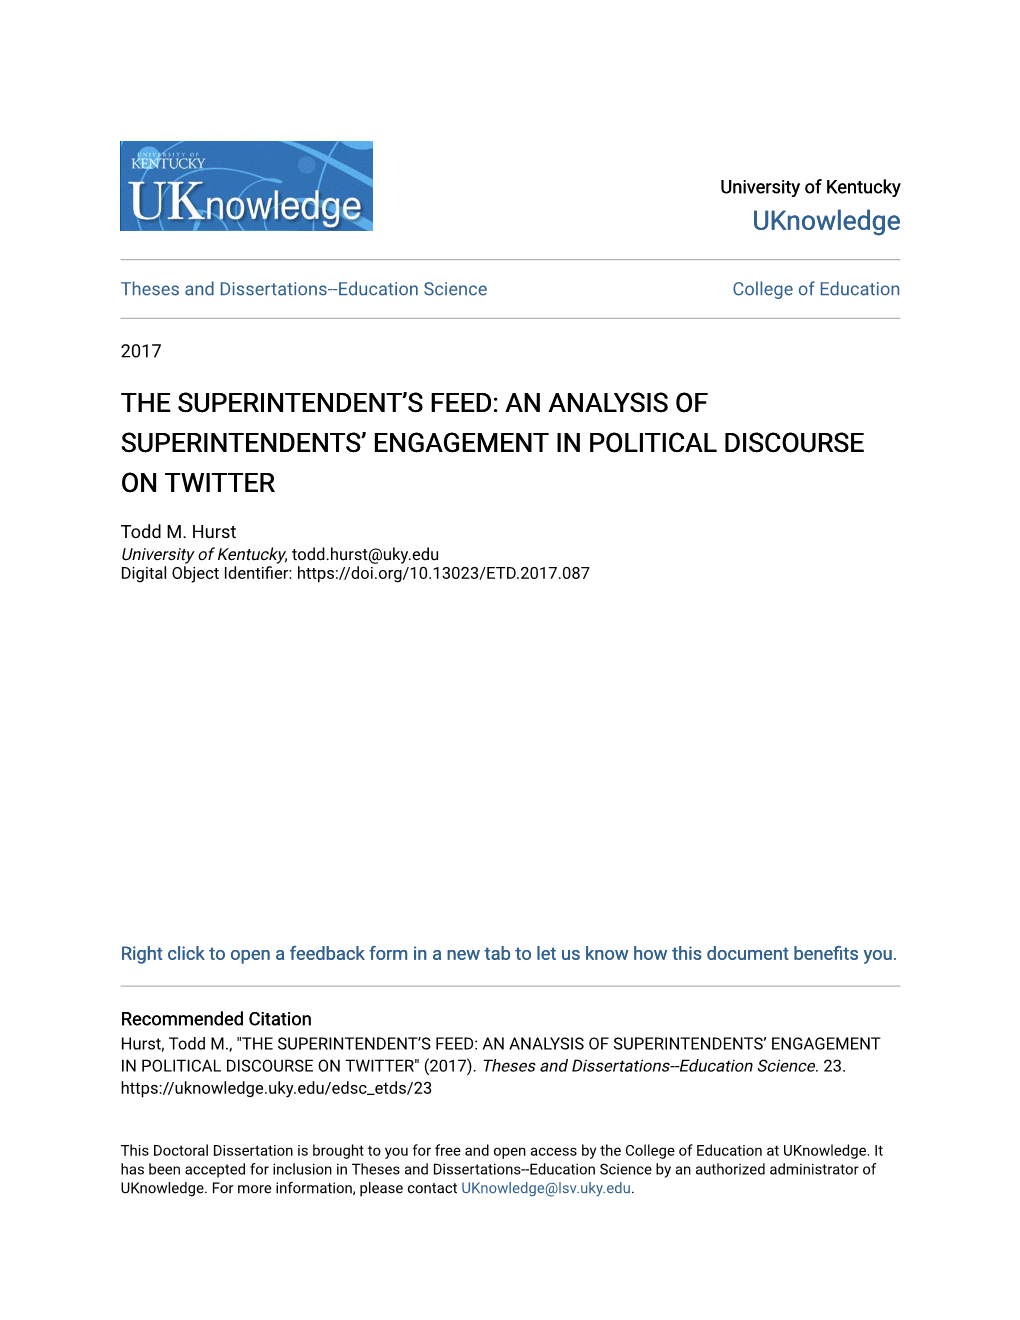 An Analysis of Superintendents' Engagement in Political Discourse on Twitter